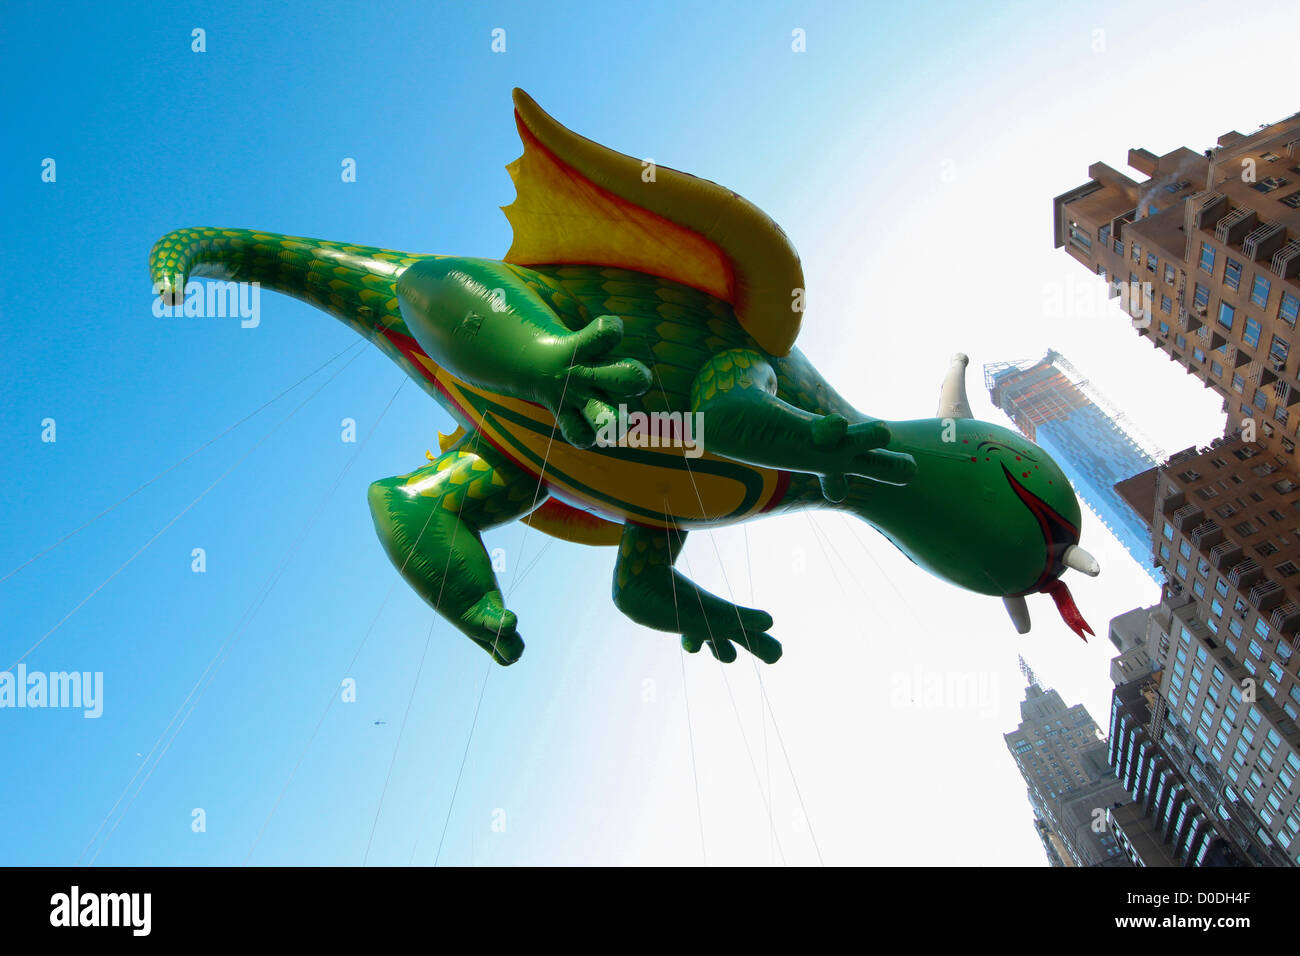 Rex the Happy Dragon balloon soars over Columbus Circle during Macy's Thanksgiving Day Parade in New York City, on Thursday, Nov. 22, 2012. Stock Photo